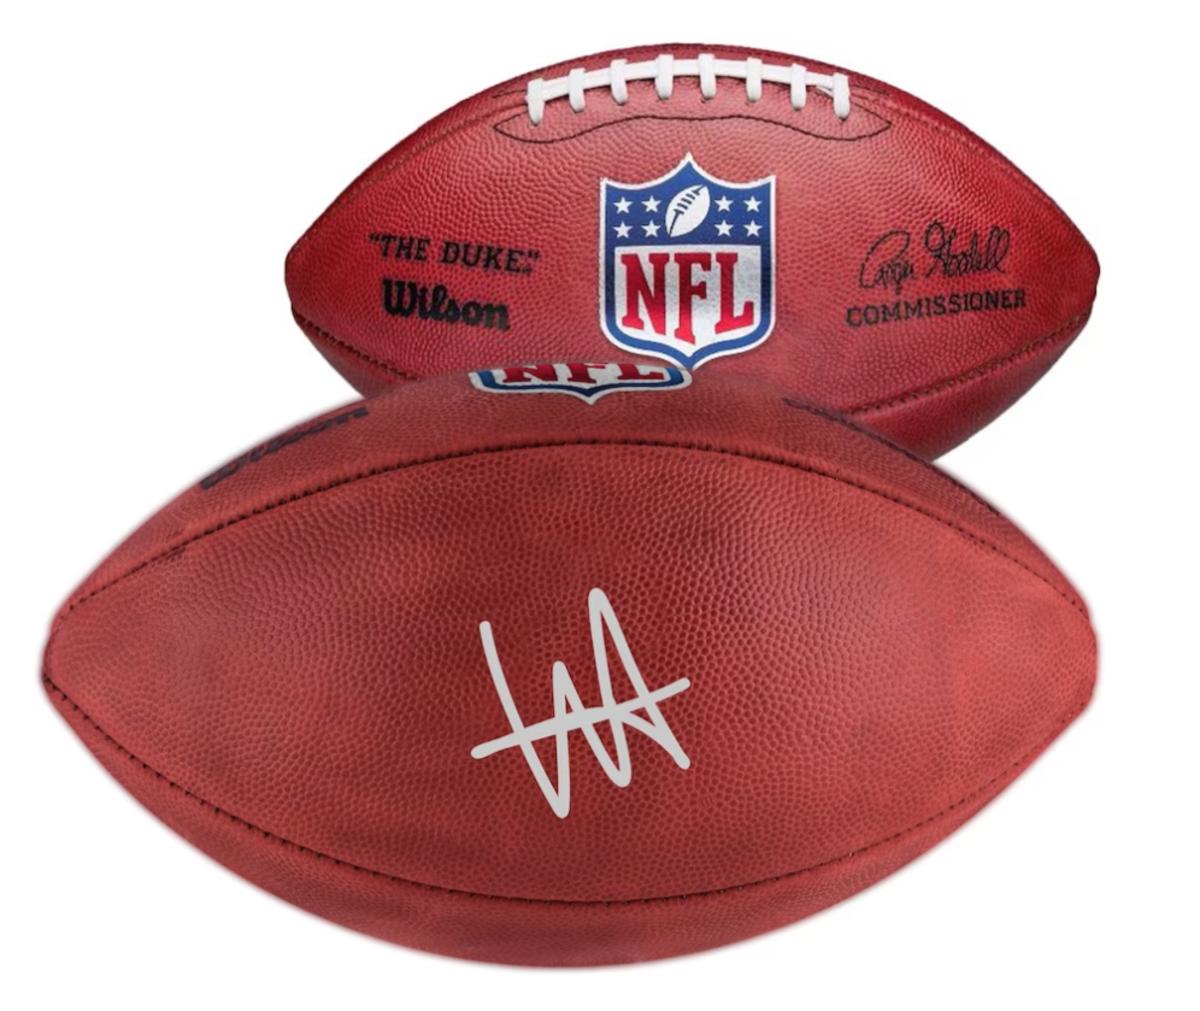 Will Anderson Jr. Houston Texans Fanatics Authentic 2023 NFL Draft First Round Pick Autographed Duke Football - $179.99